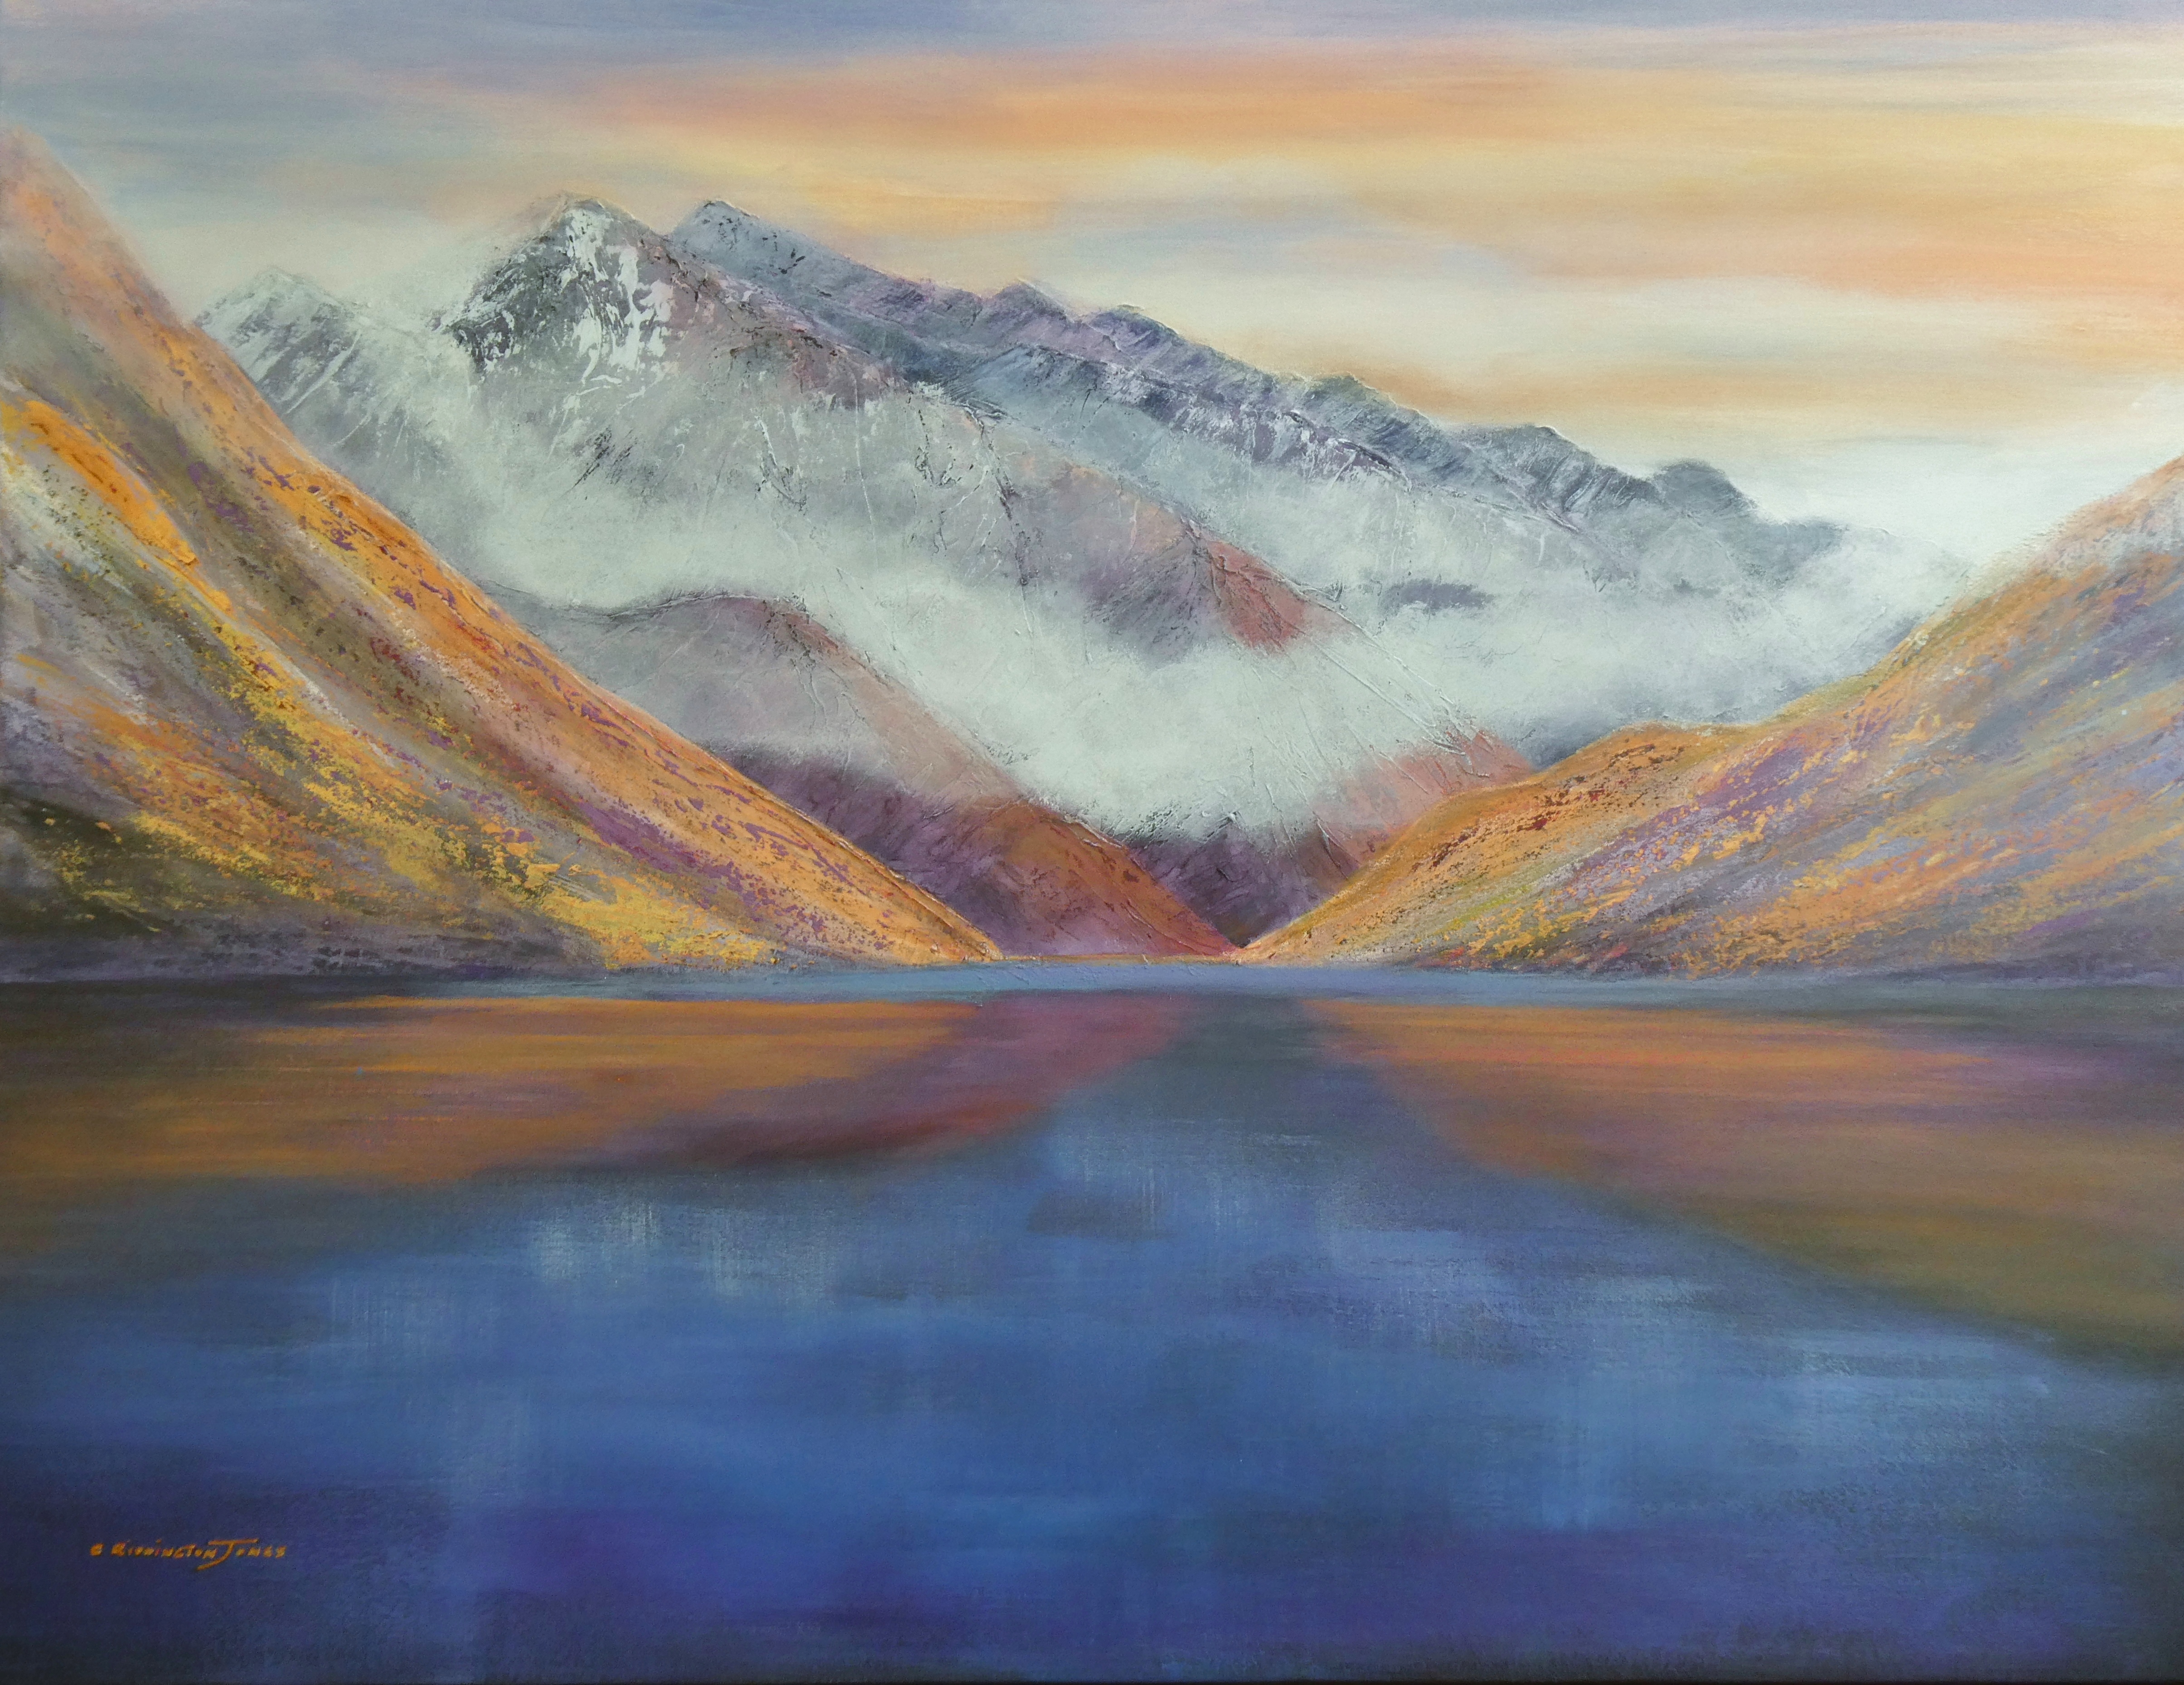 Painting of Misty Mountain and Lake by Clare Riddington Jones